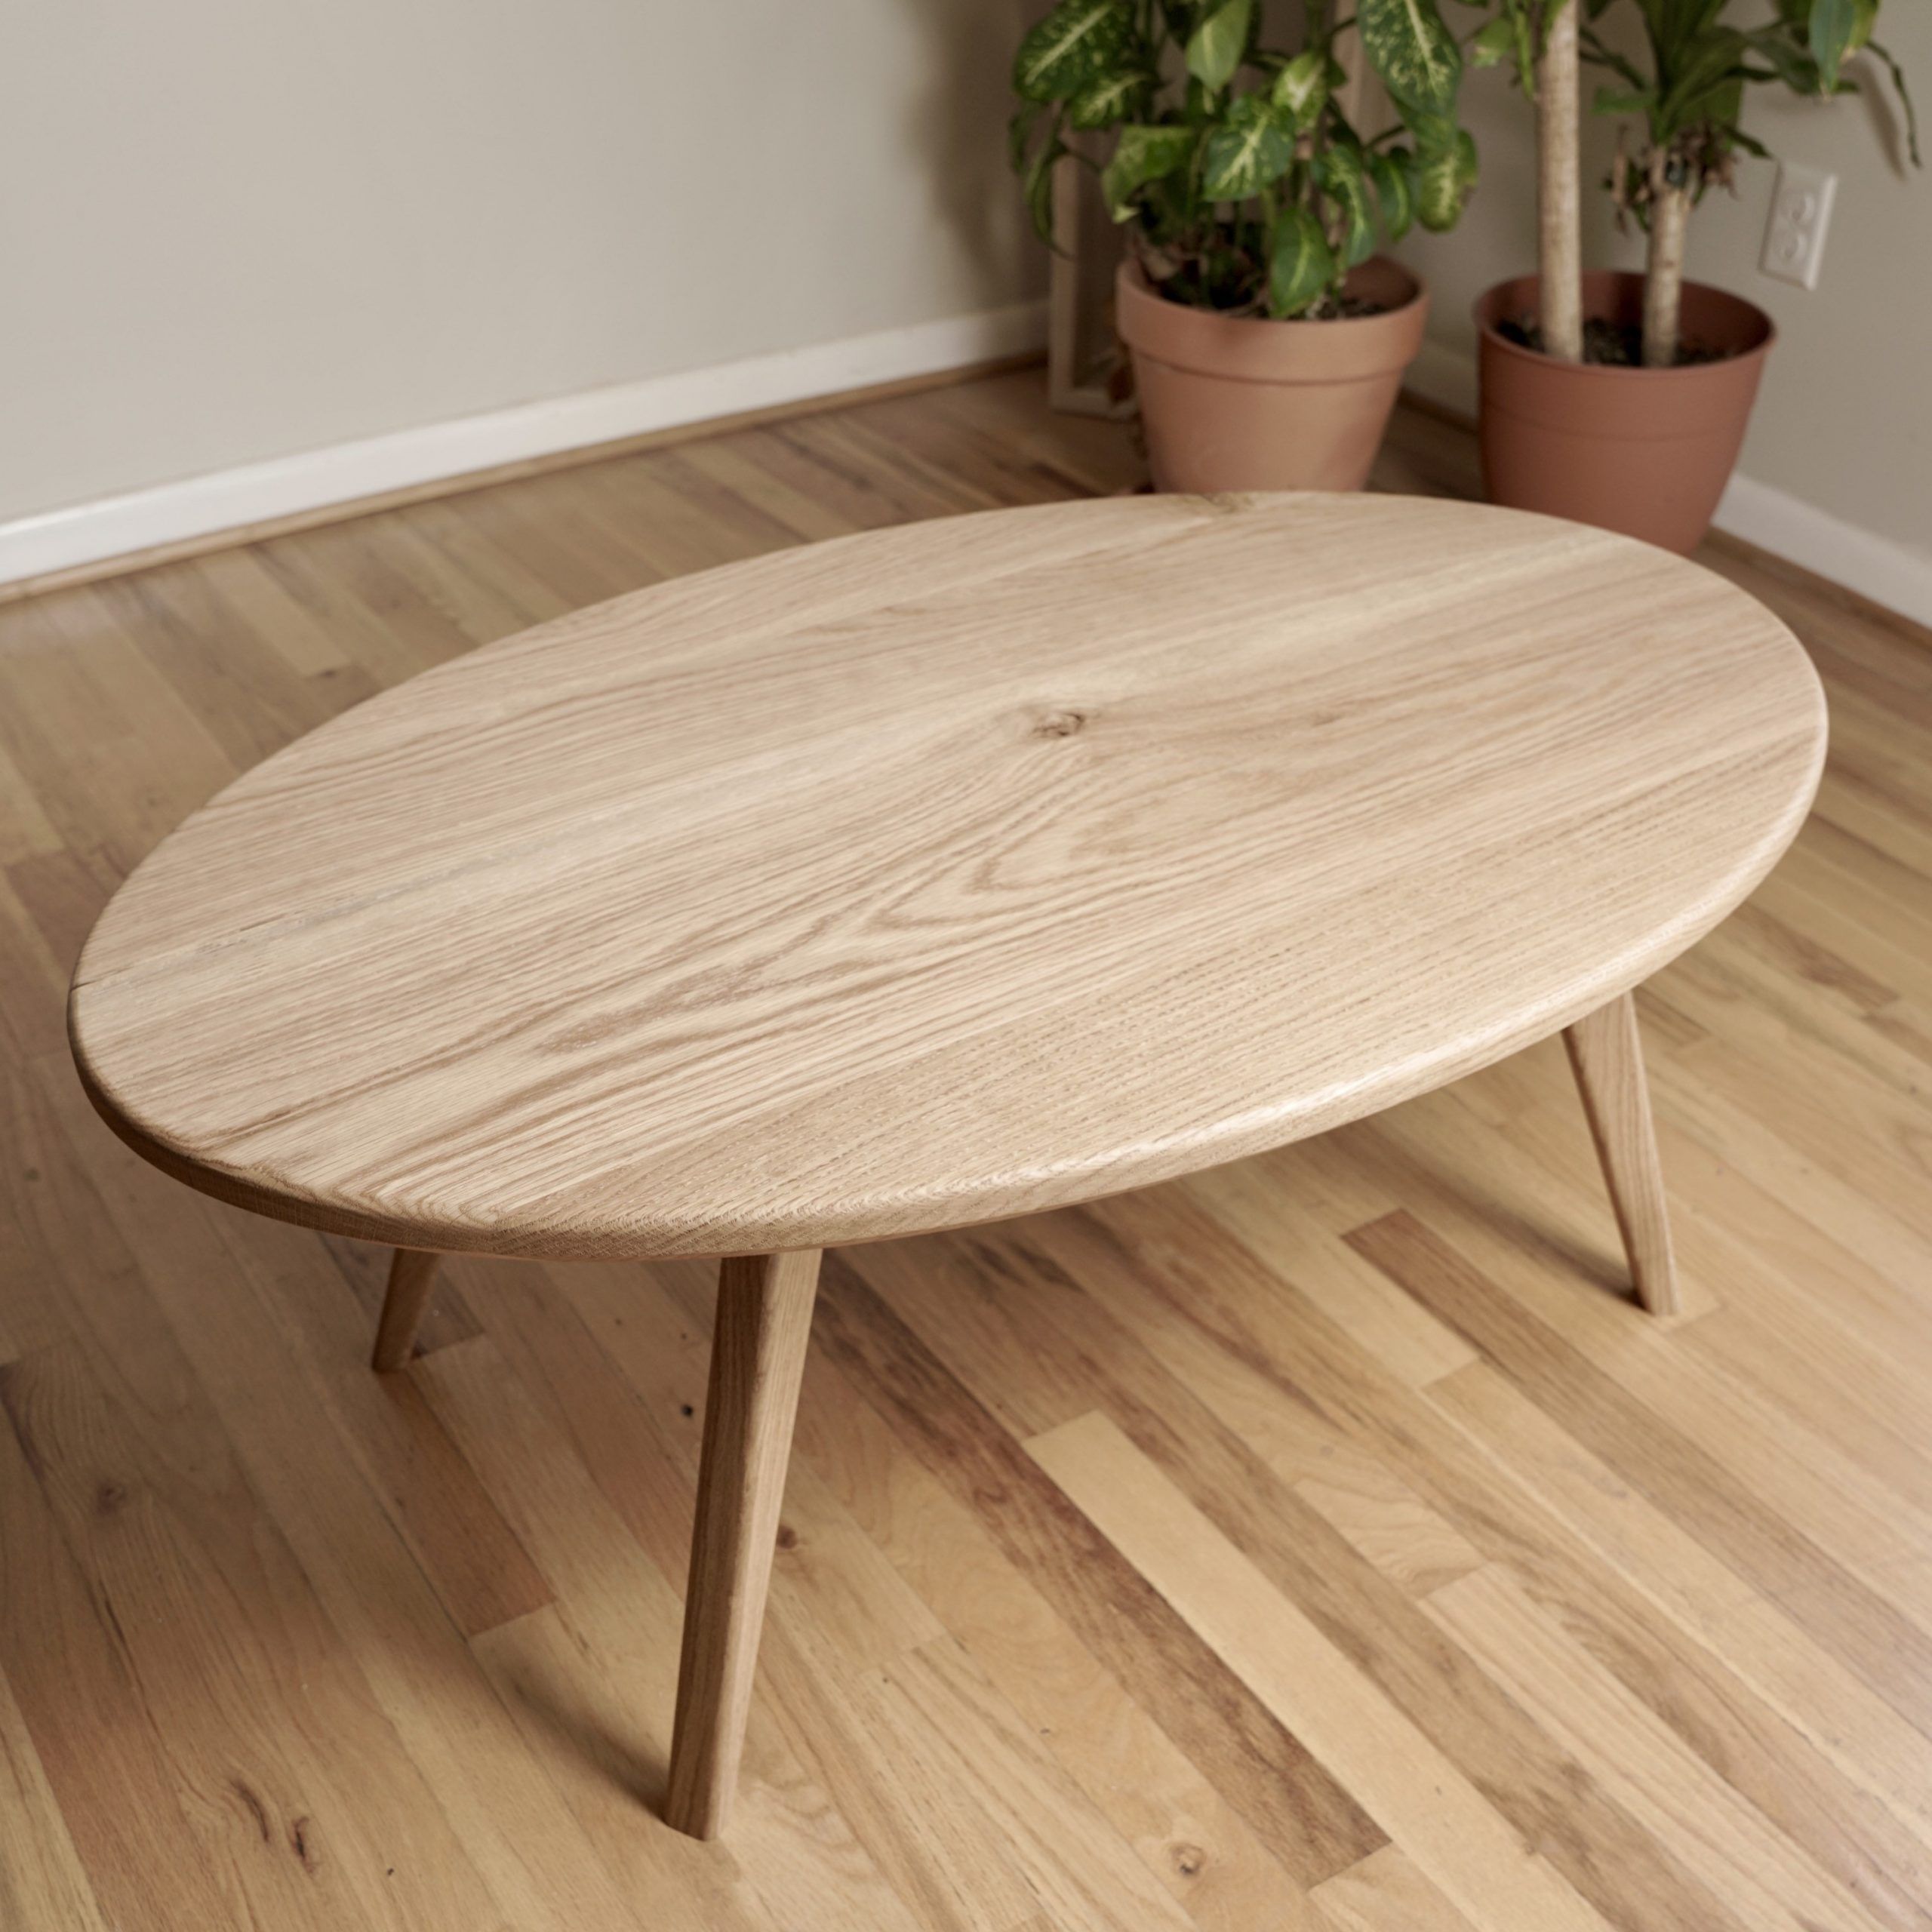 Trendy Scandinavian Coffee Tables Within Oval Scandinavian Coffee Table – Etsy (View 7 of 20)